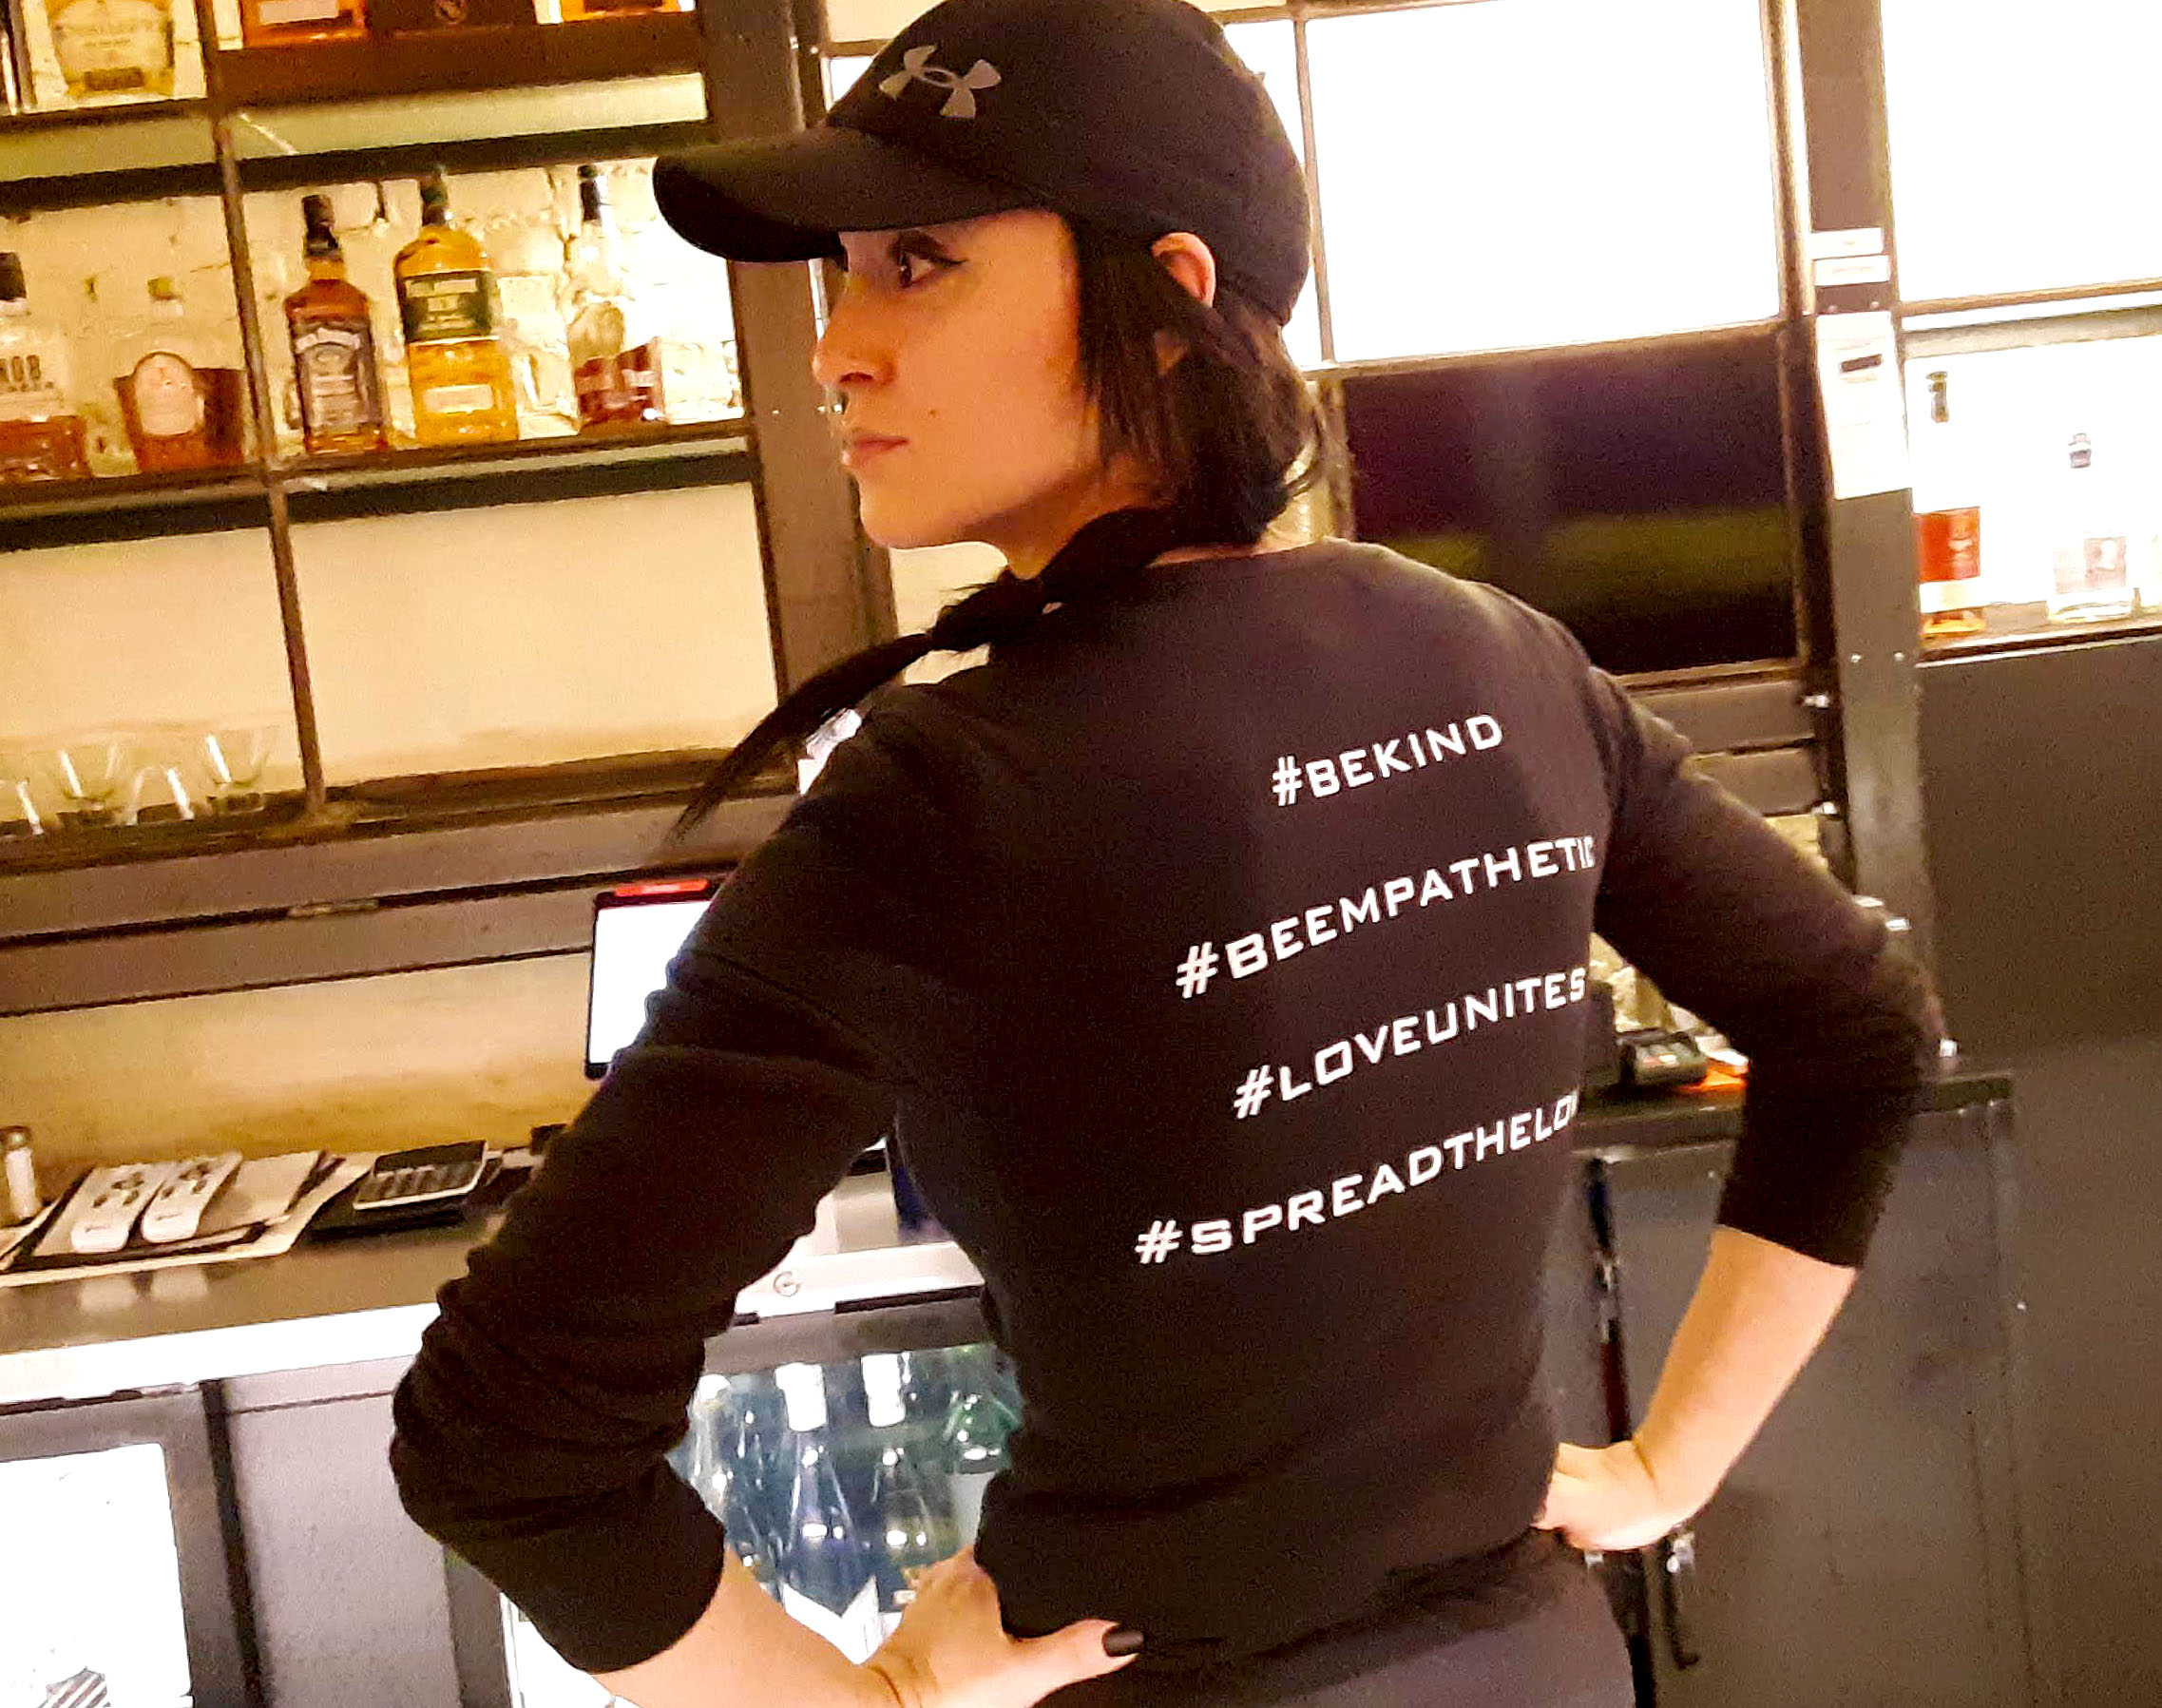 A server shows off the back of her black t-shirt with different positive hashtags. Photo by Paul Young.